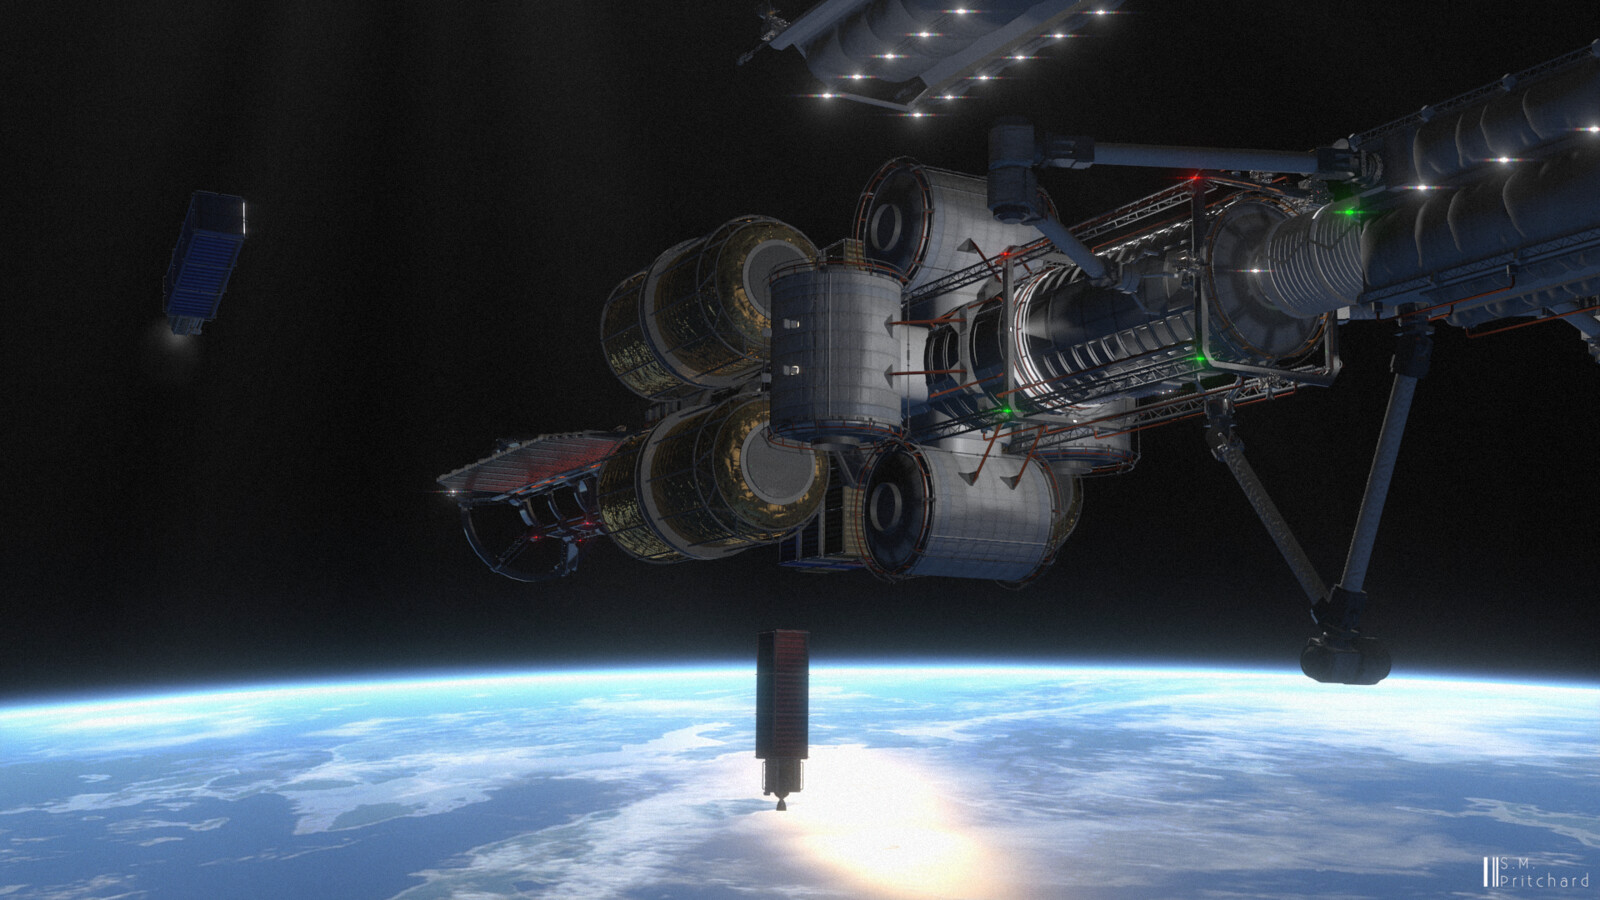 Berthed at a space station in Low-Earth Orbit, loading cargo.